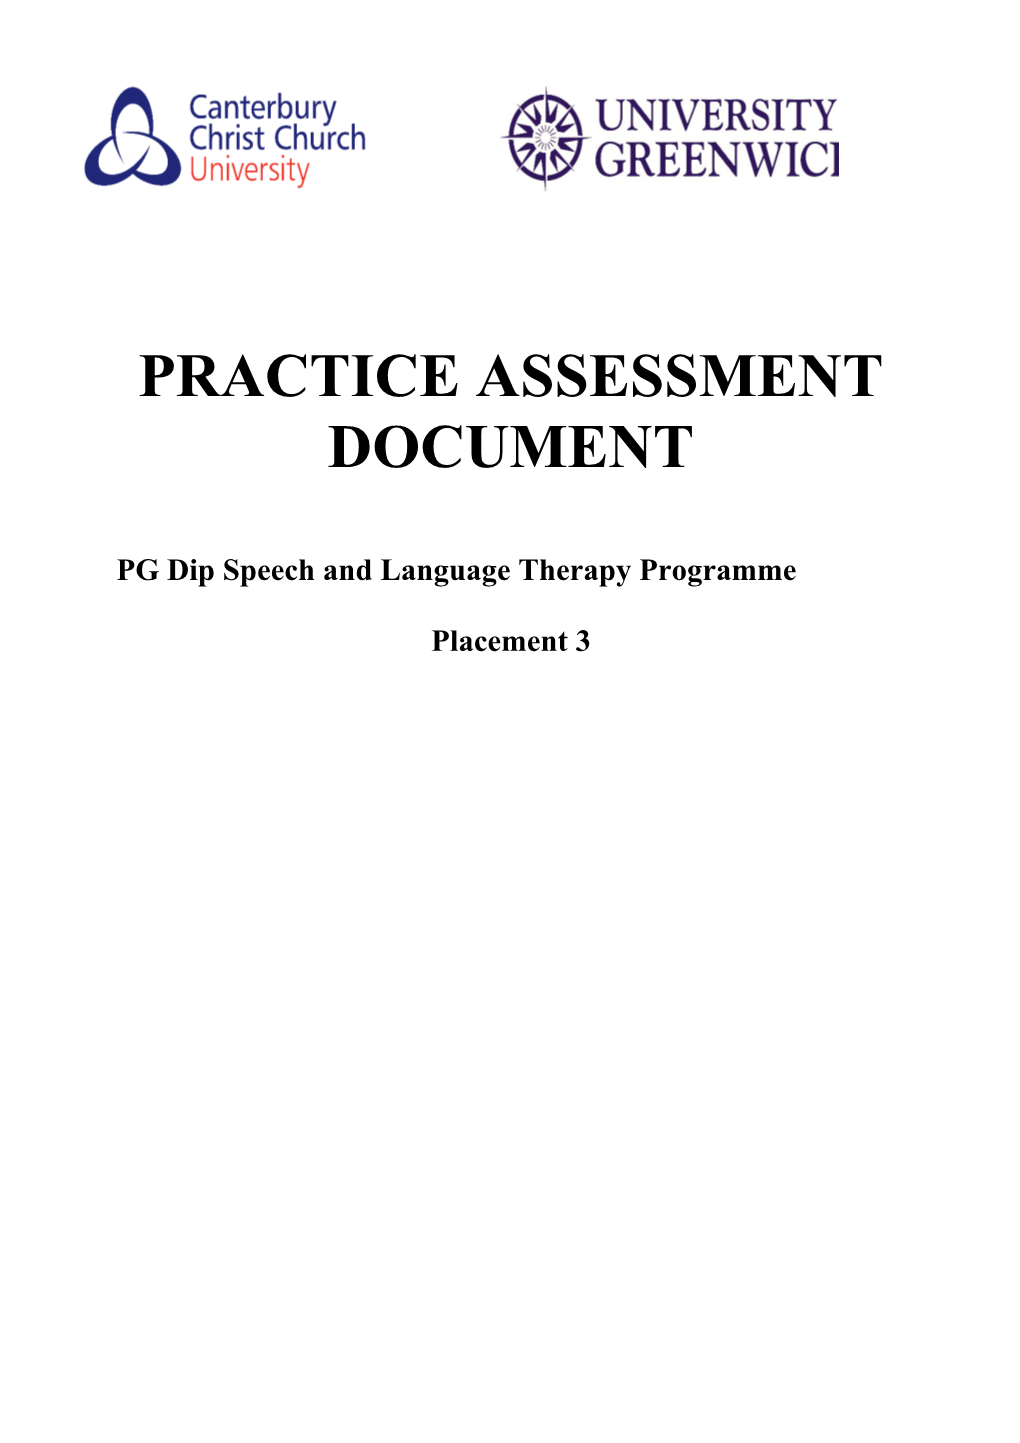 PG Dip Speech and Language Therapy Programme